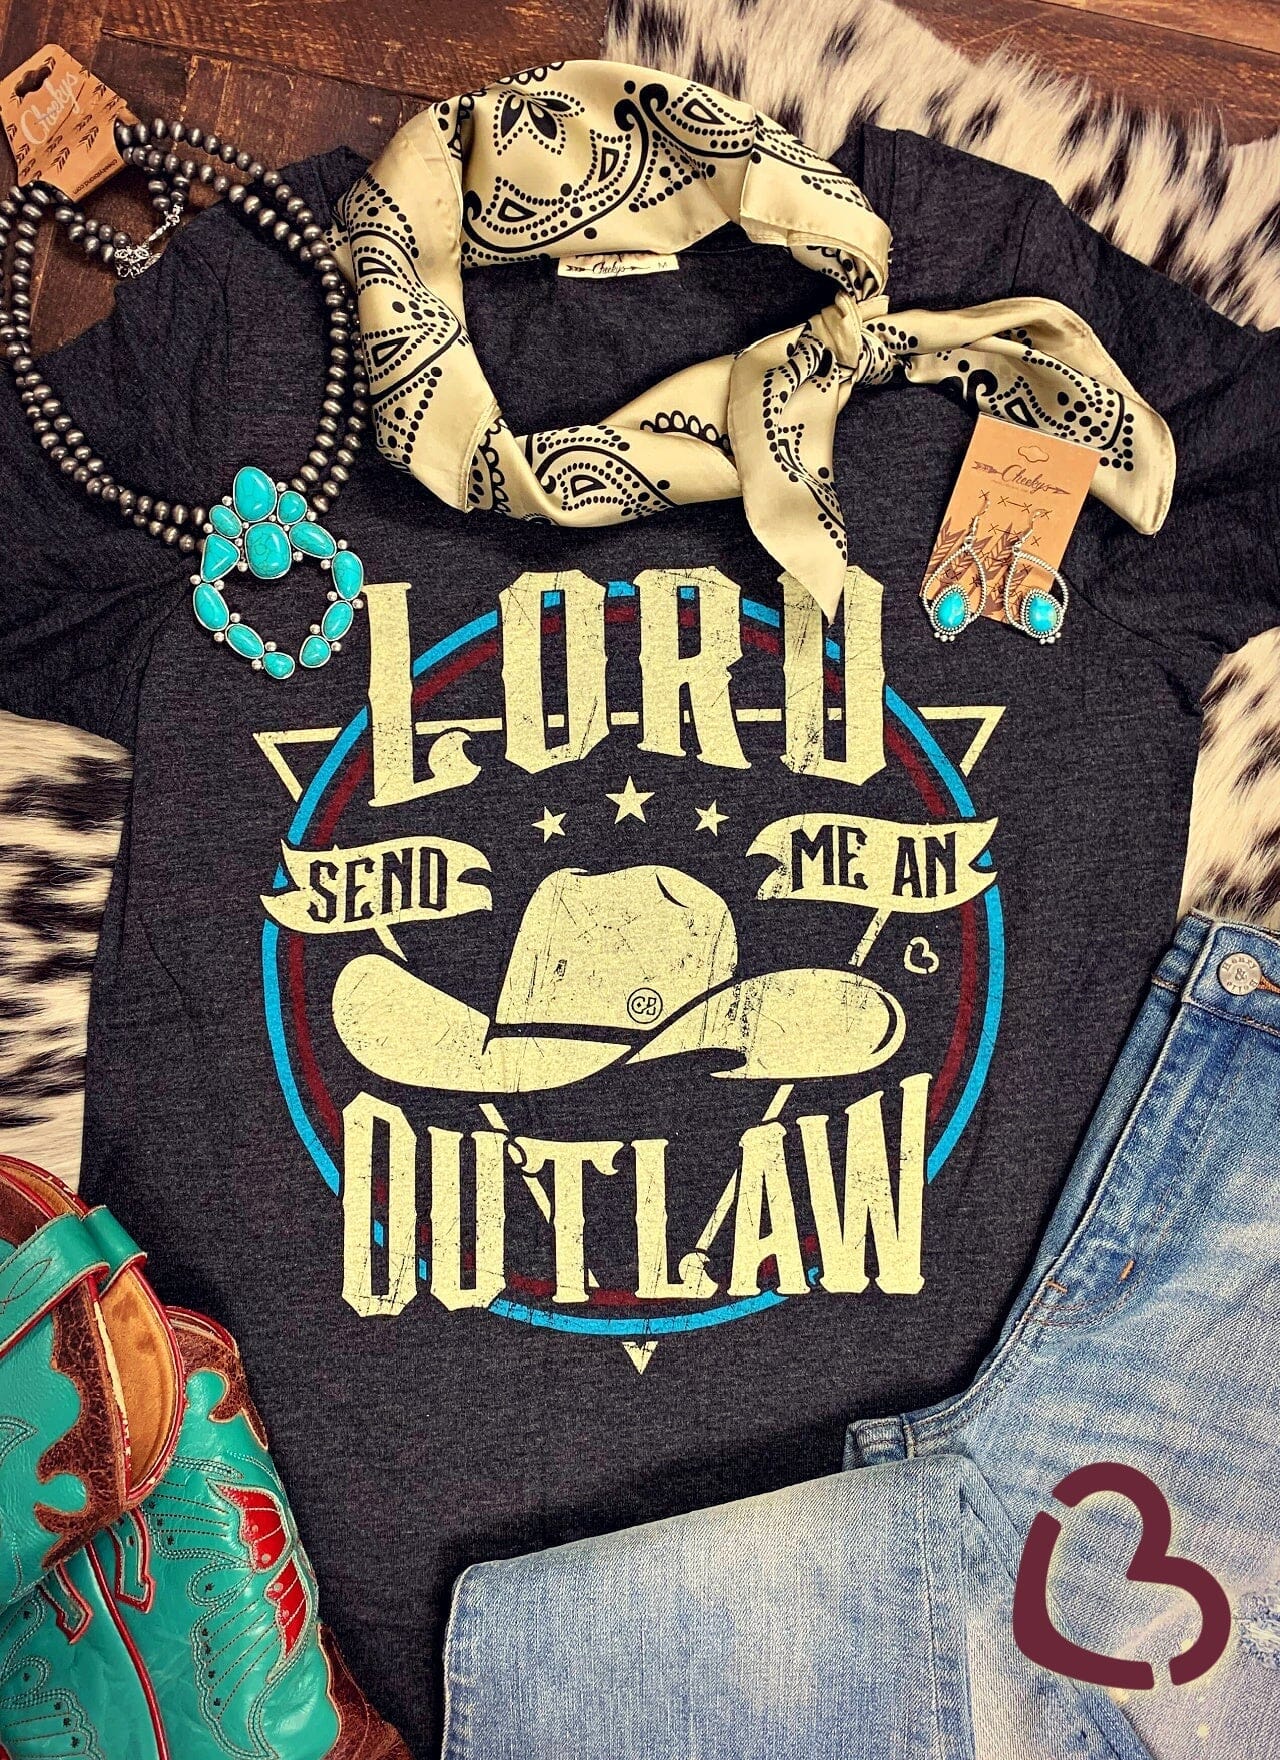 Lord Send Me An Outlaw Scoop Neck tee on Vintage Black Cheekys Apparel 23 